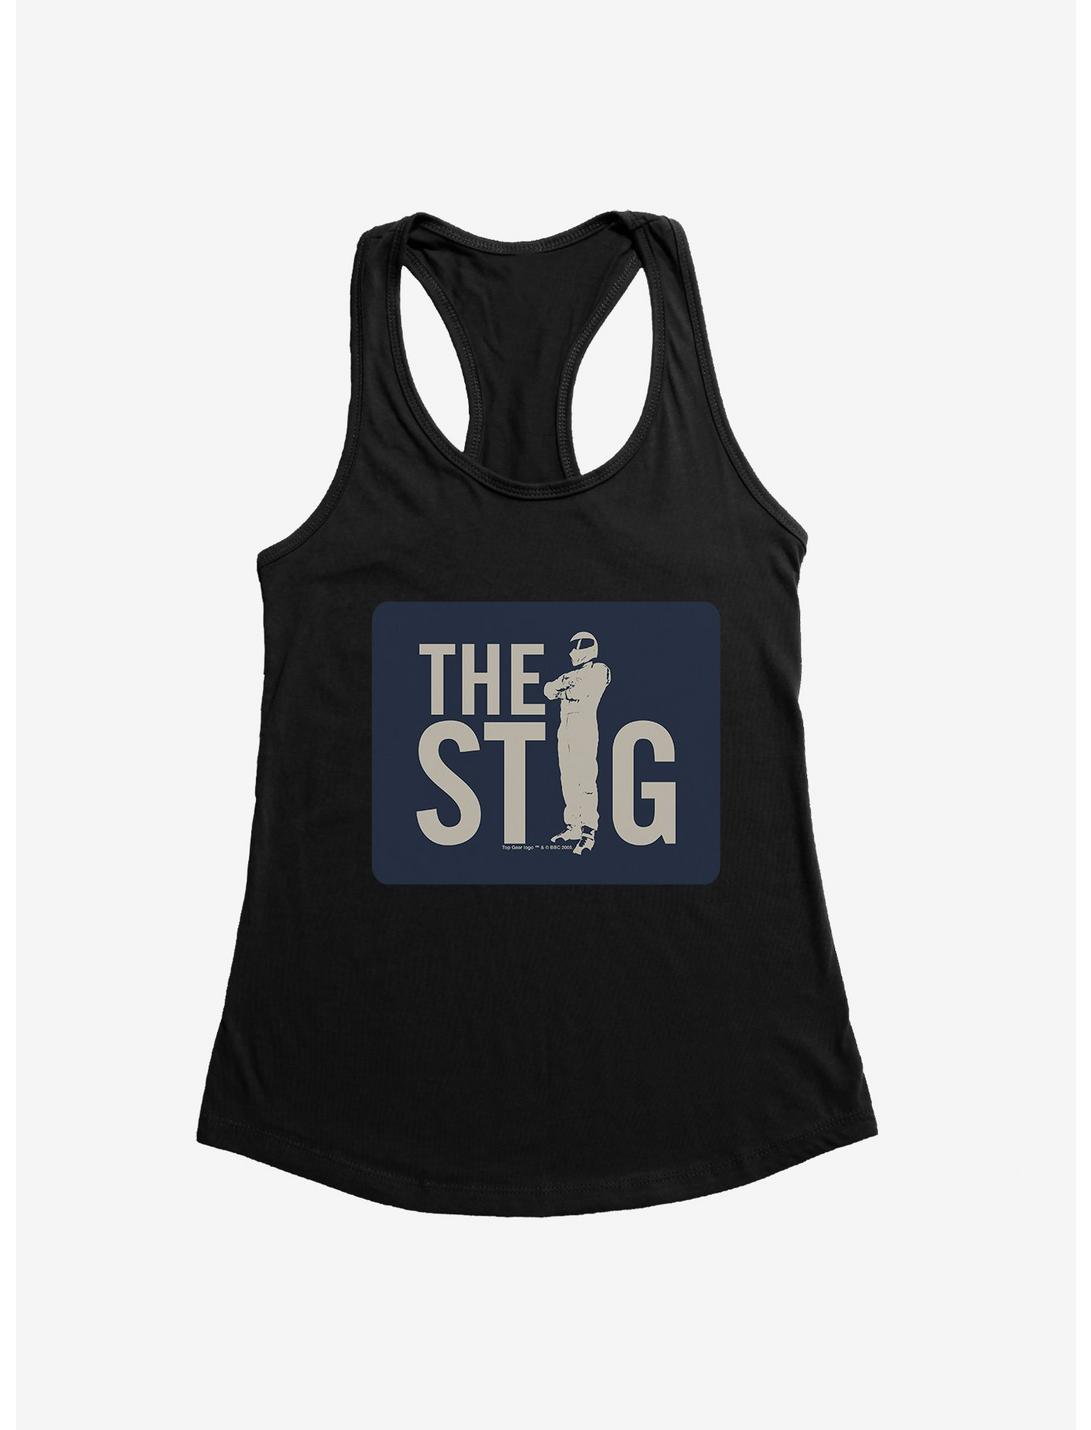 Top Gear Stig Stance Sign Womens Tank Top, , hi-res